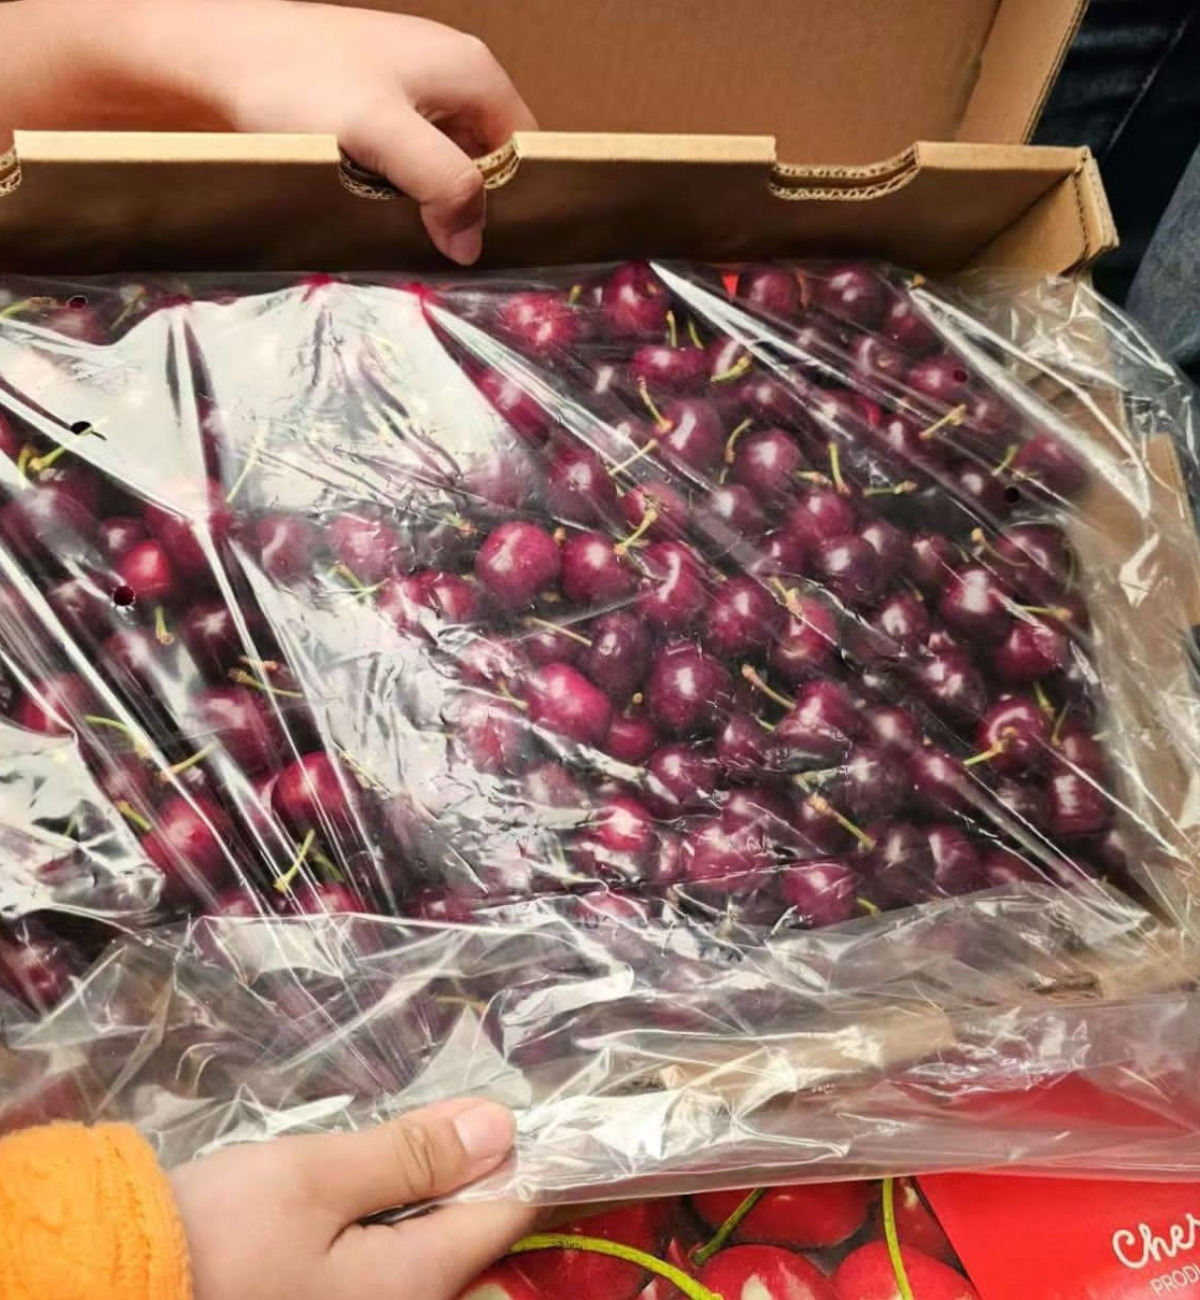 Cherries from Chile arrived in China